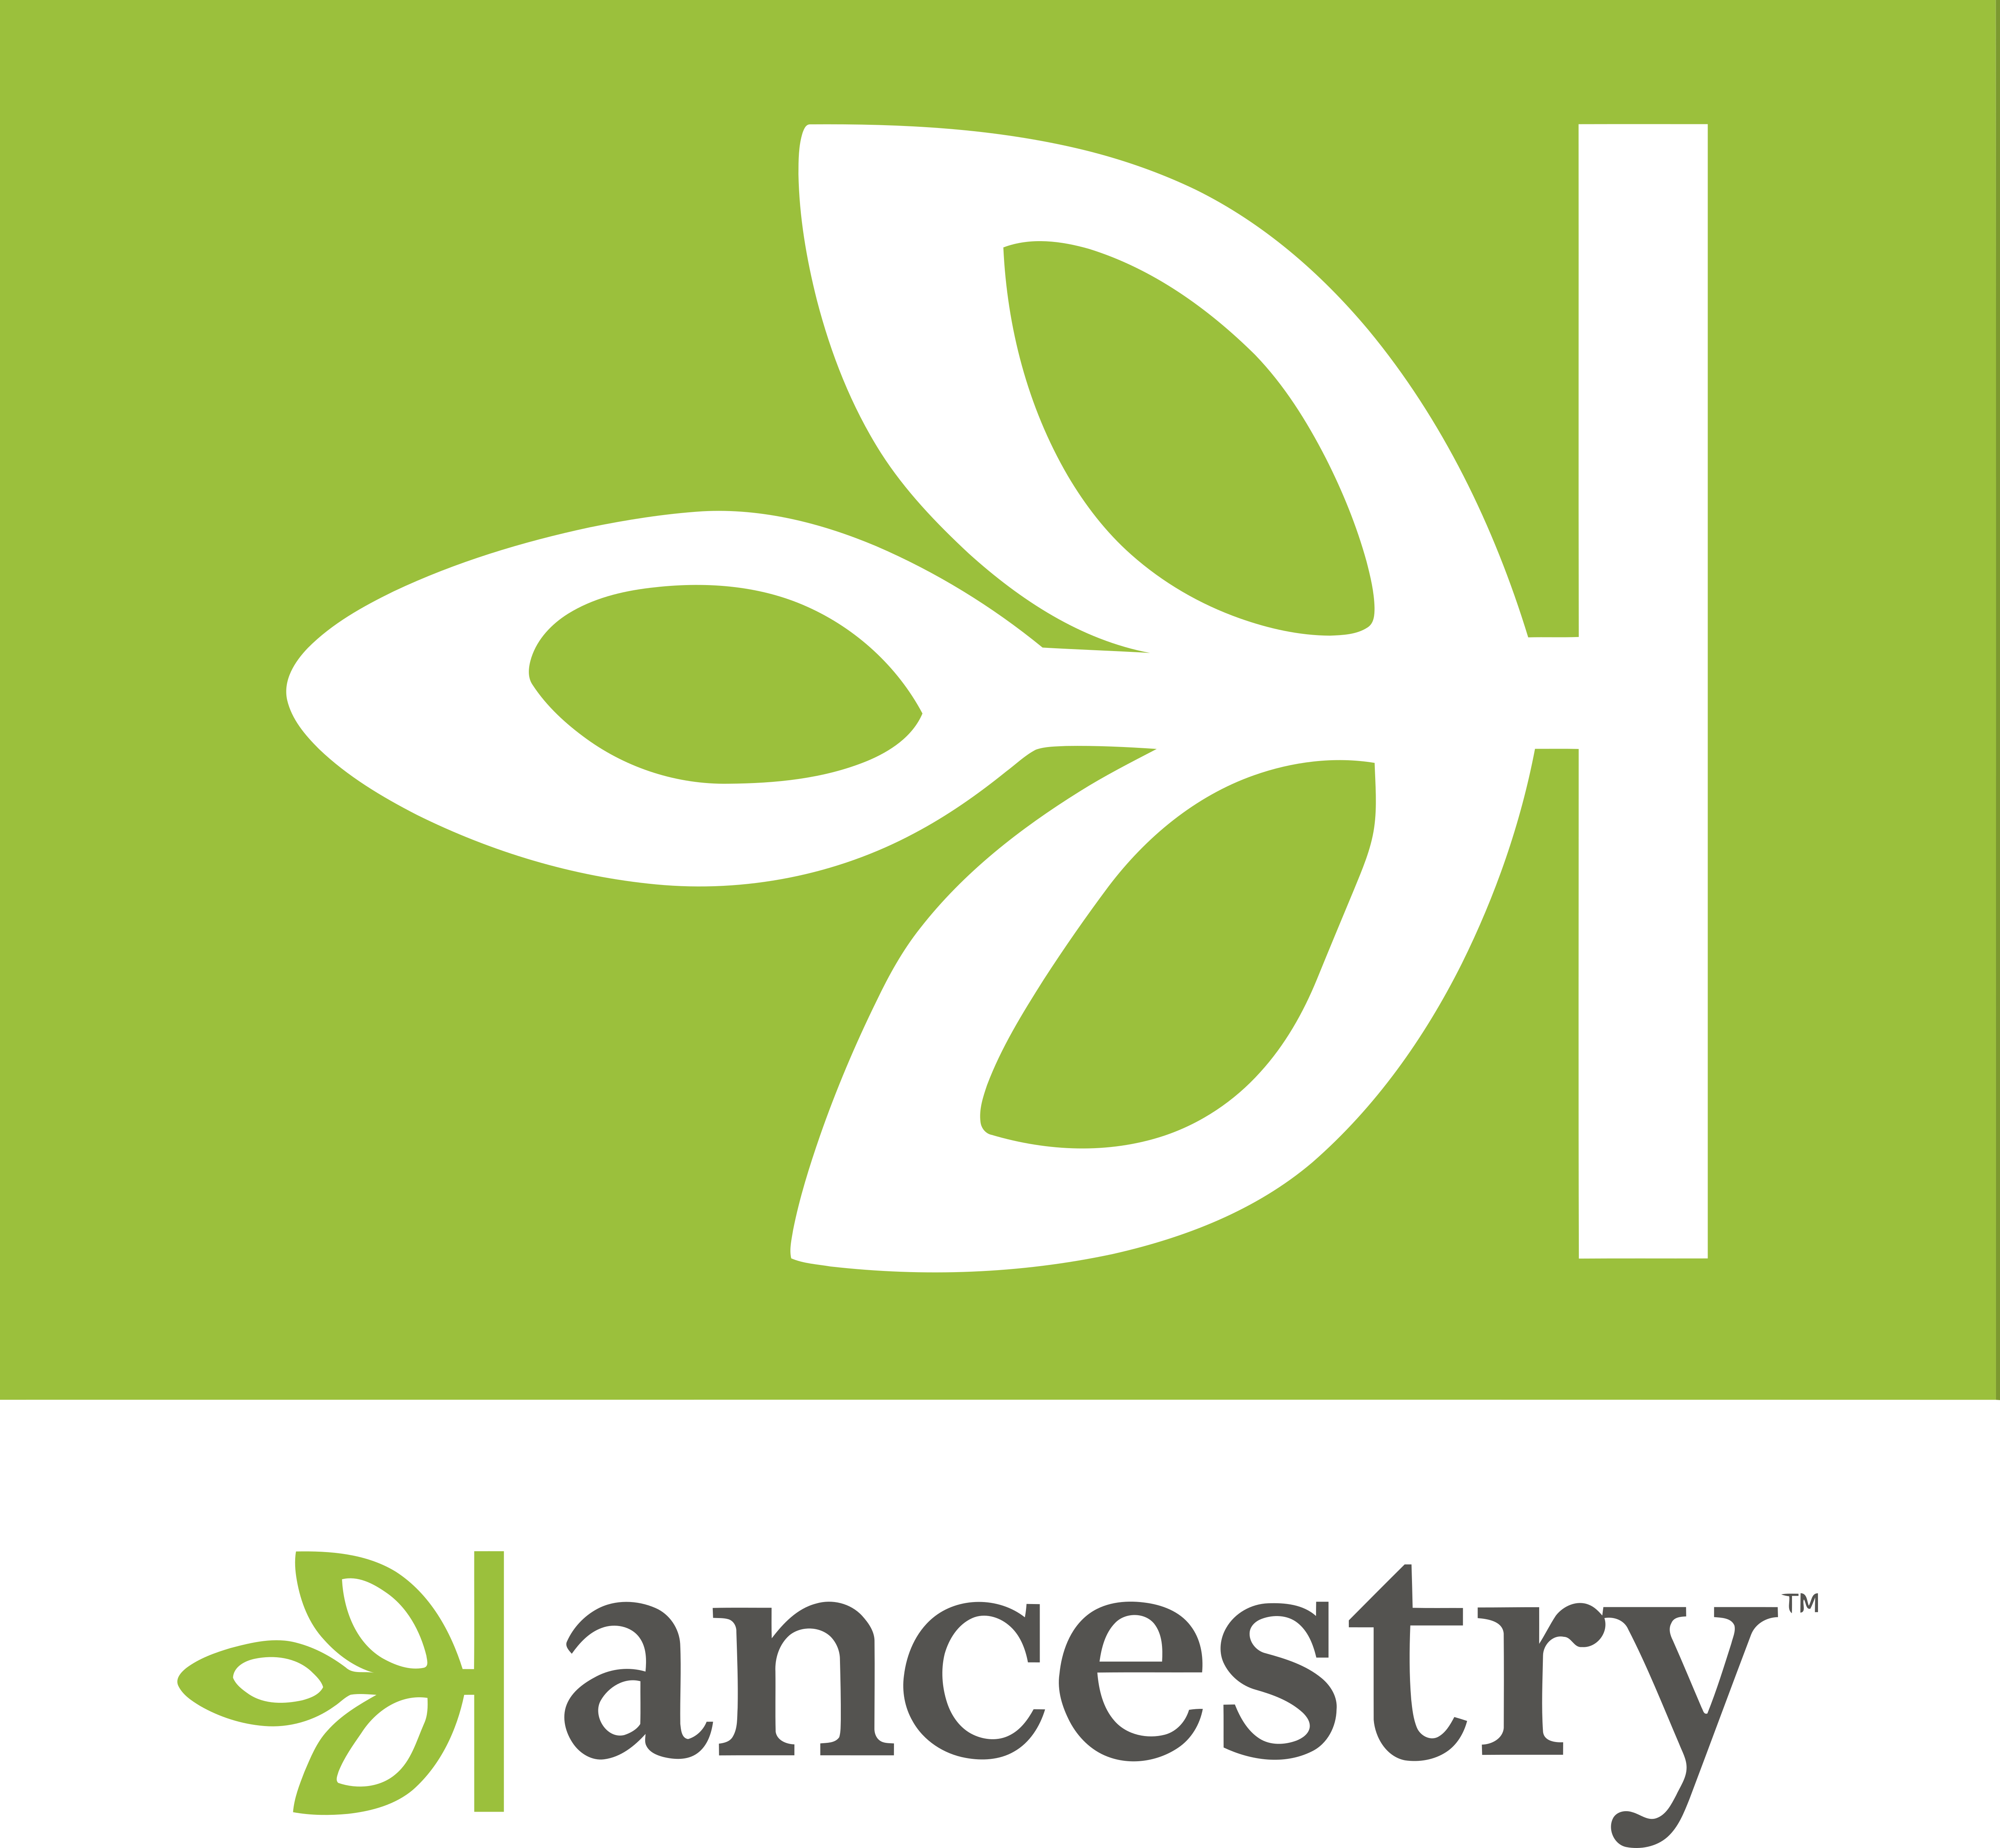 download ancestry xbox one for free